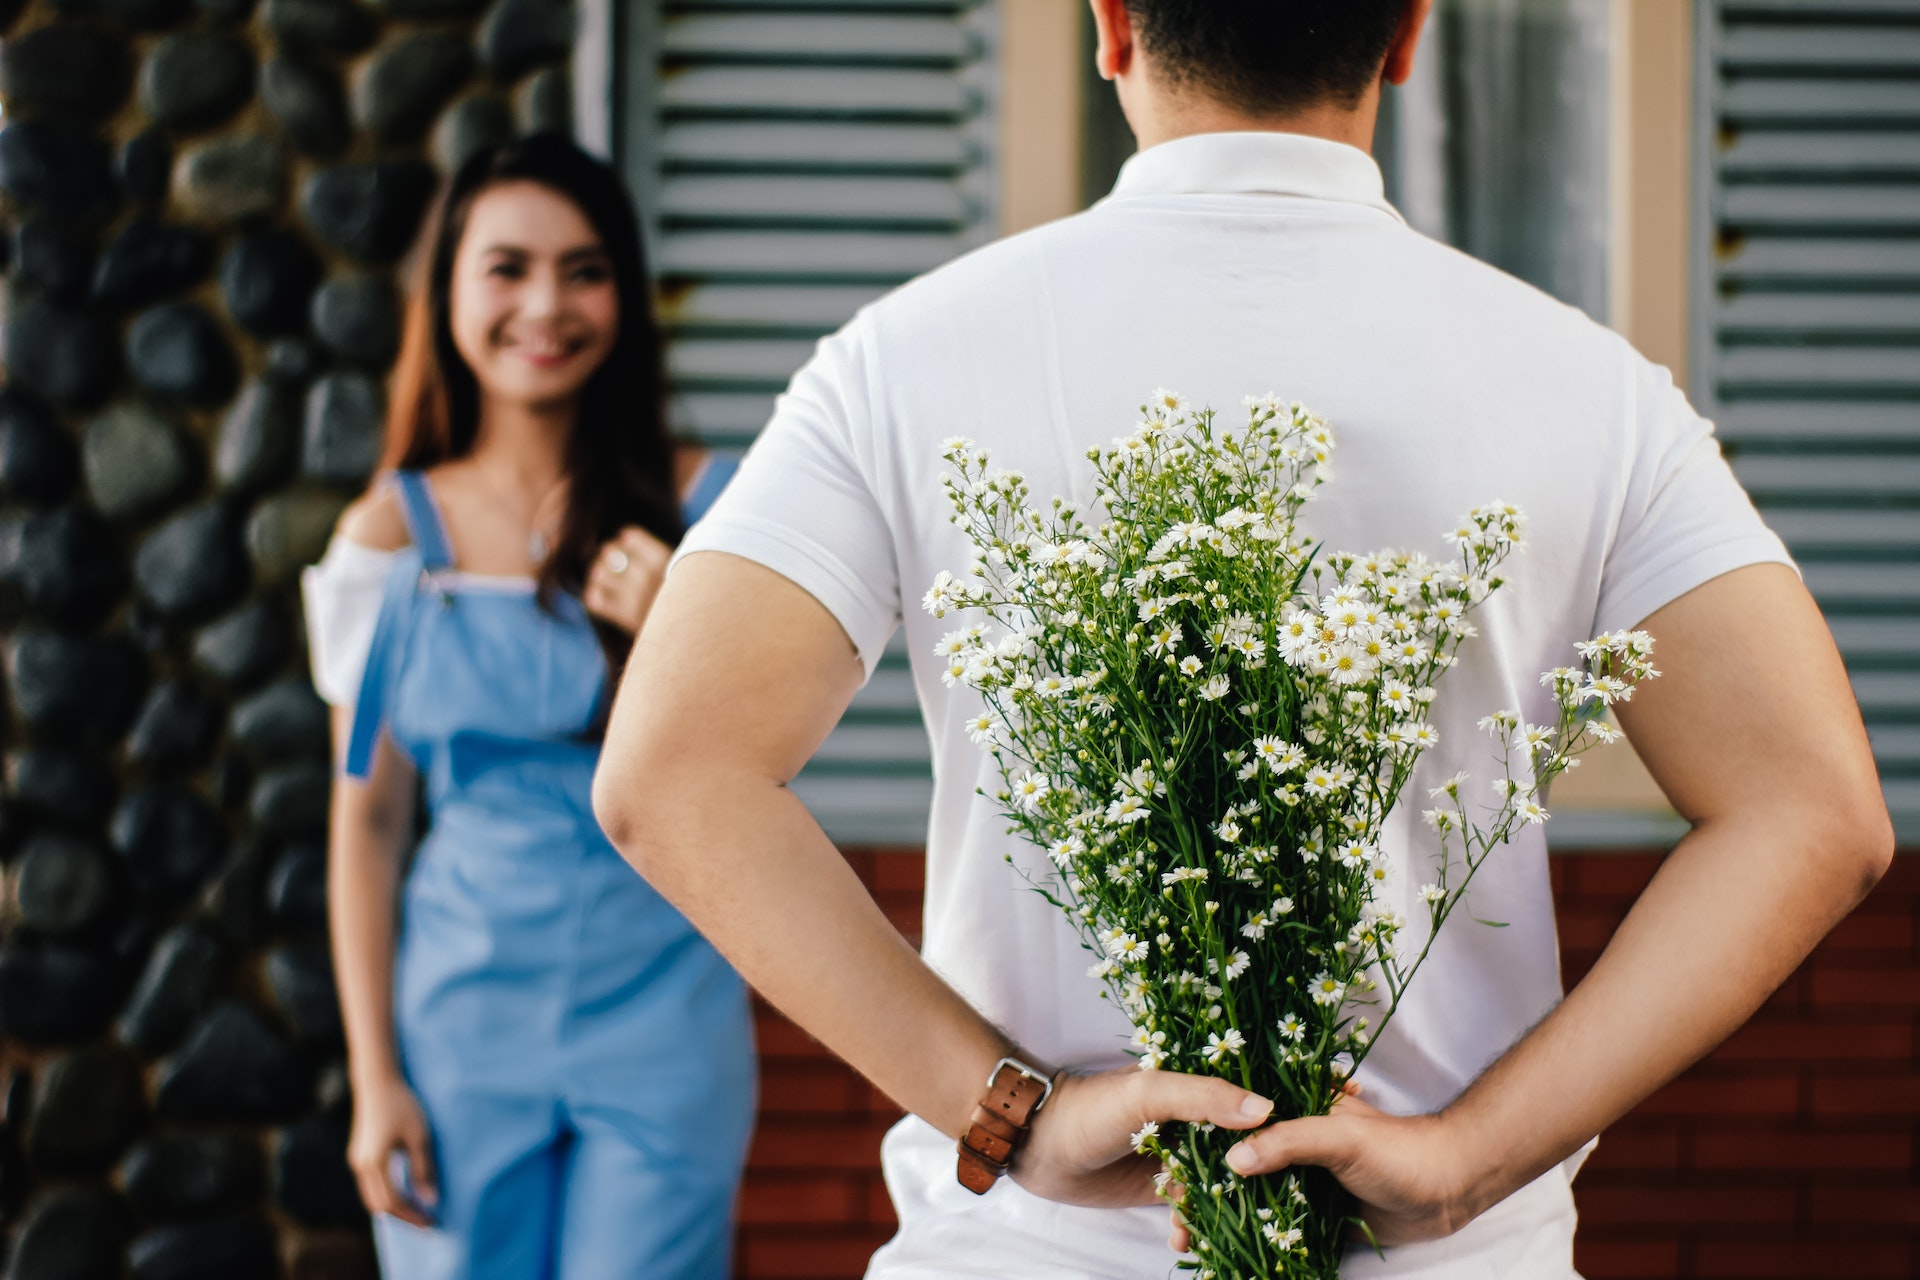 A man hiding flowers behind his back while looking at a woman | Source: Pexels